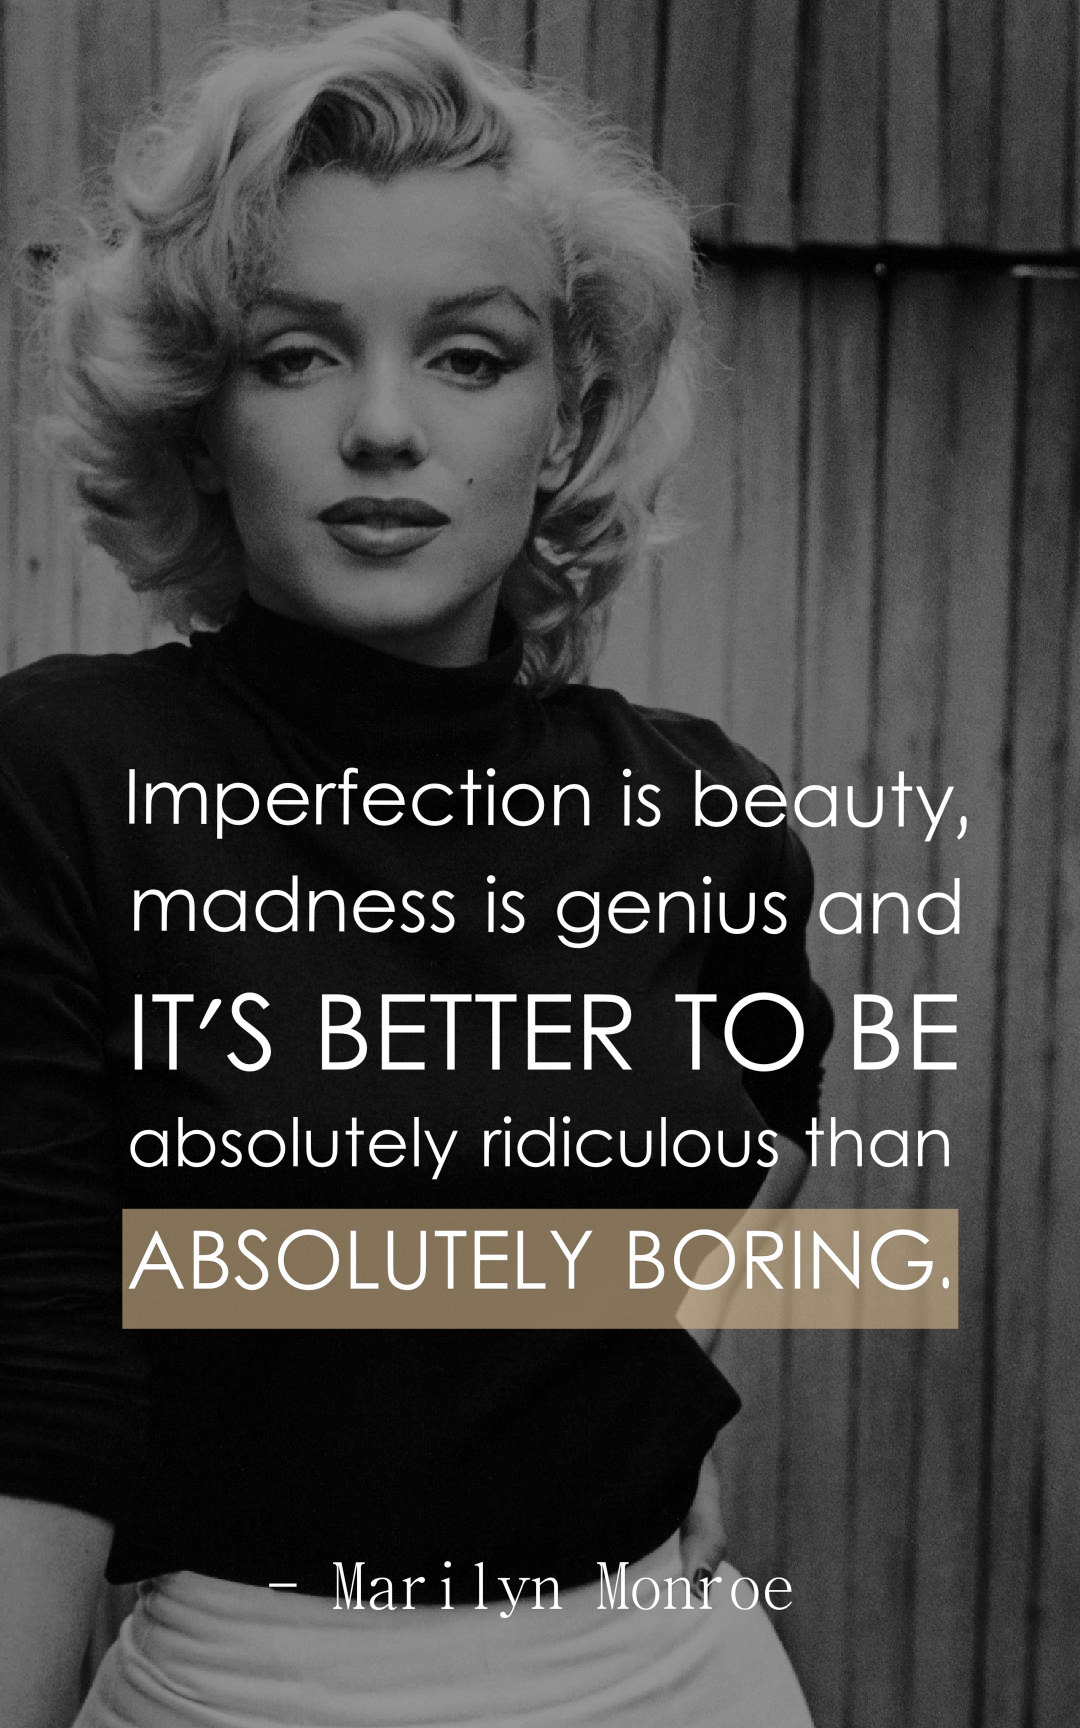 Marilyn Monroe Quotes Quotes monroe marilyn quote